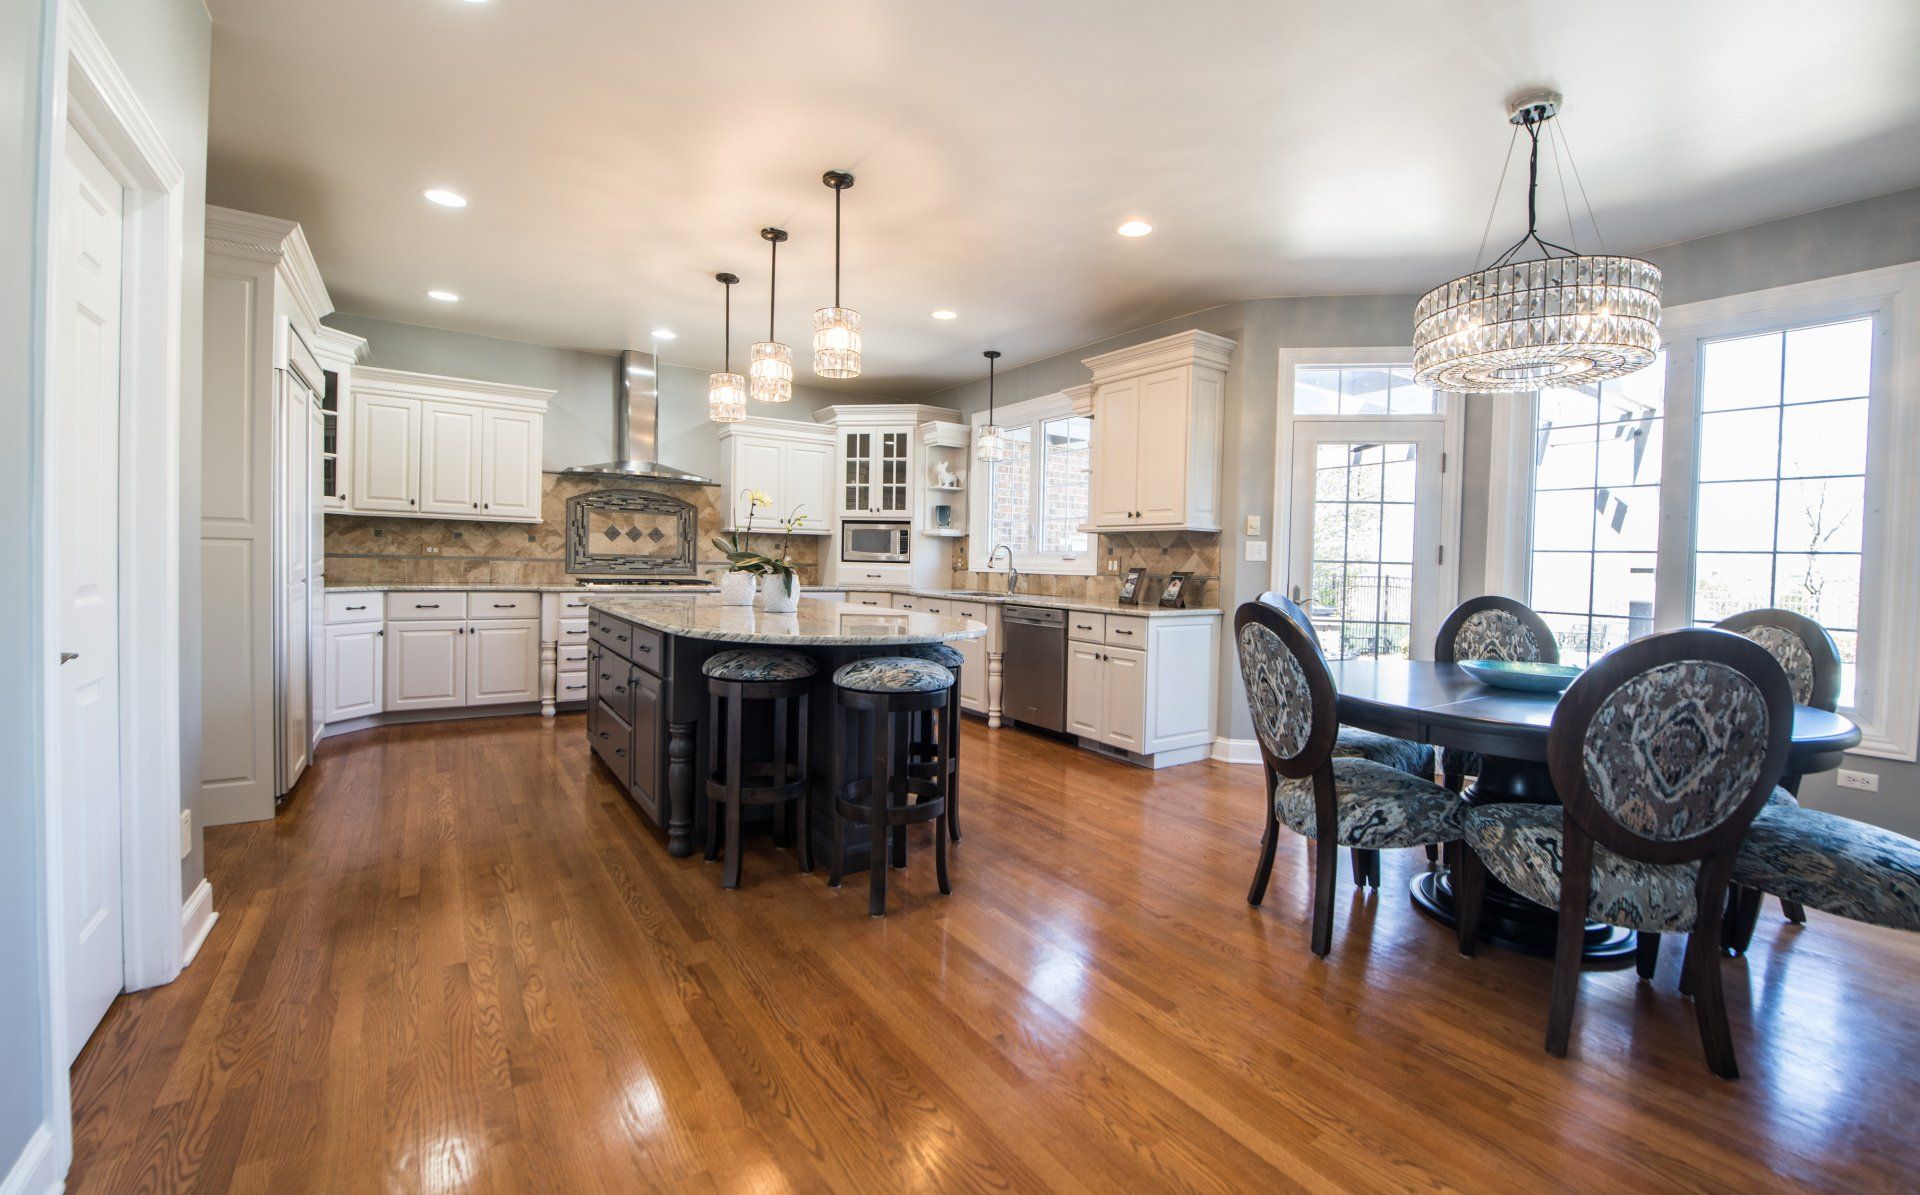 a kitchen and dining room in a house with hardwood floors and white cabinets .